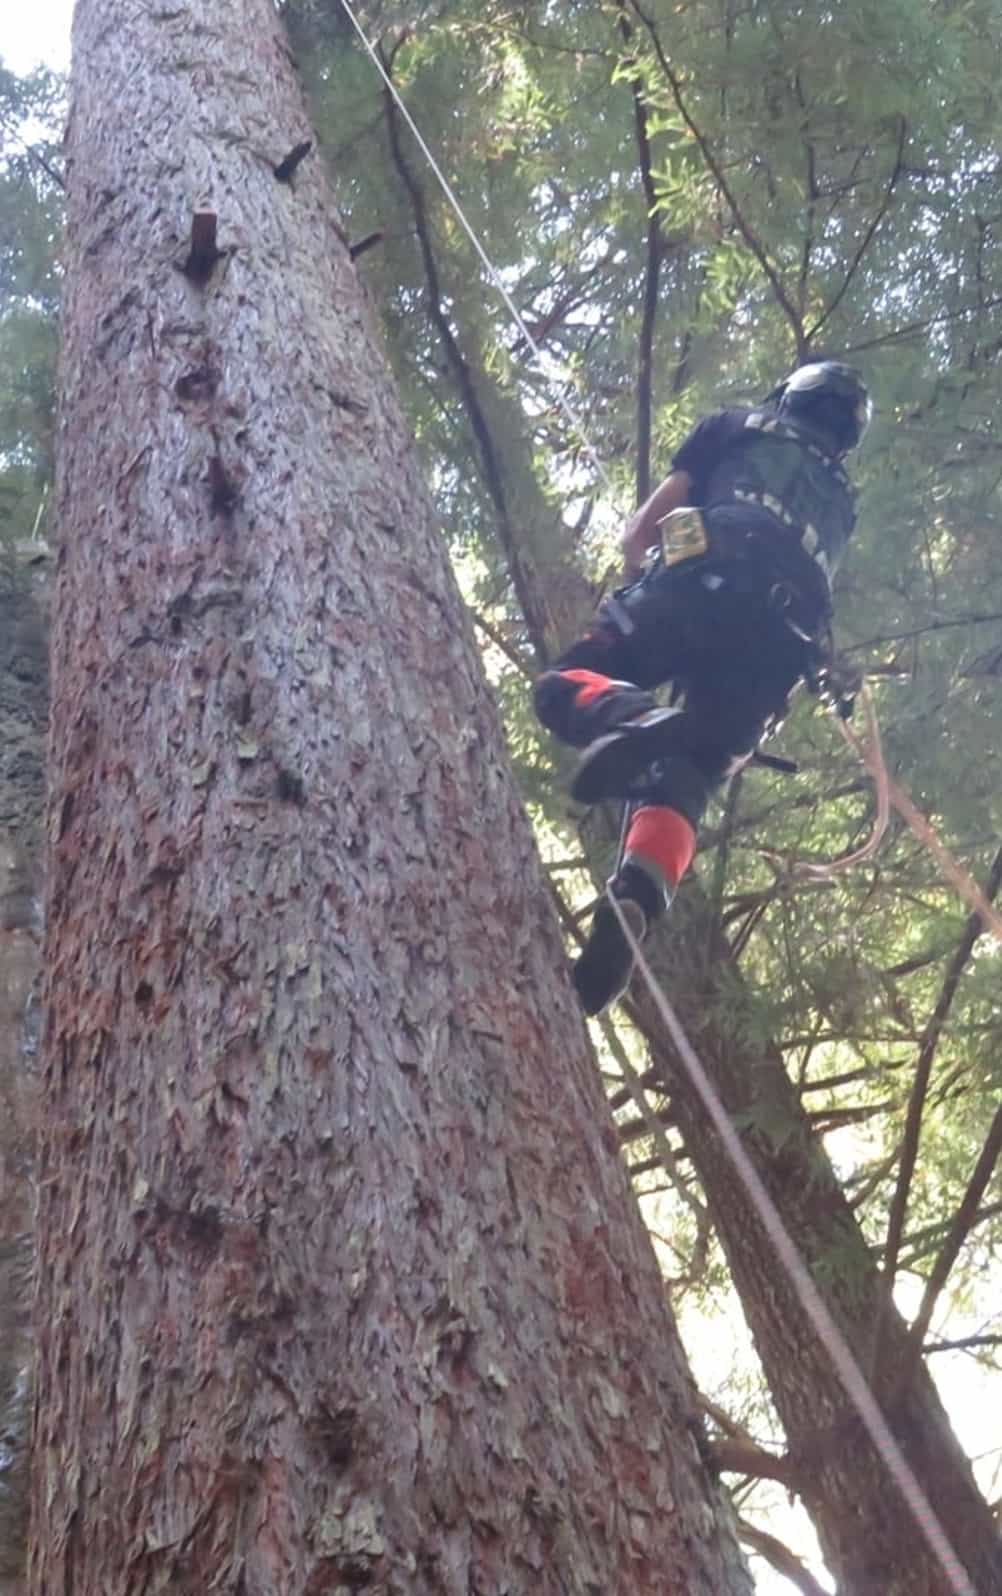 Arborists scaling a tall tree to complete a pruning job